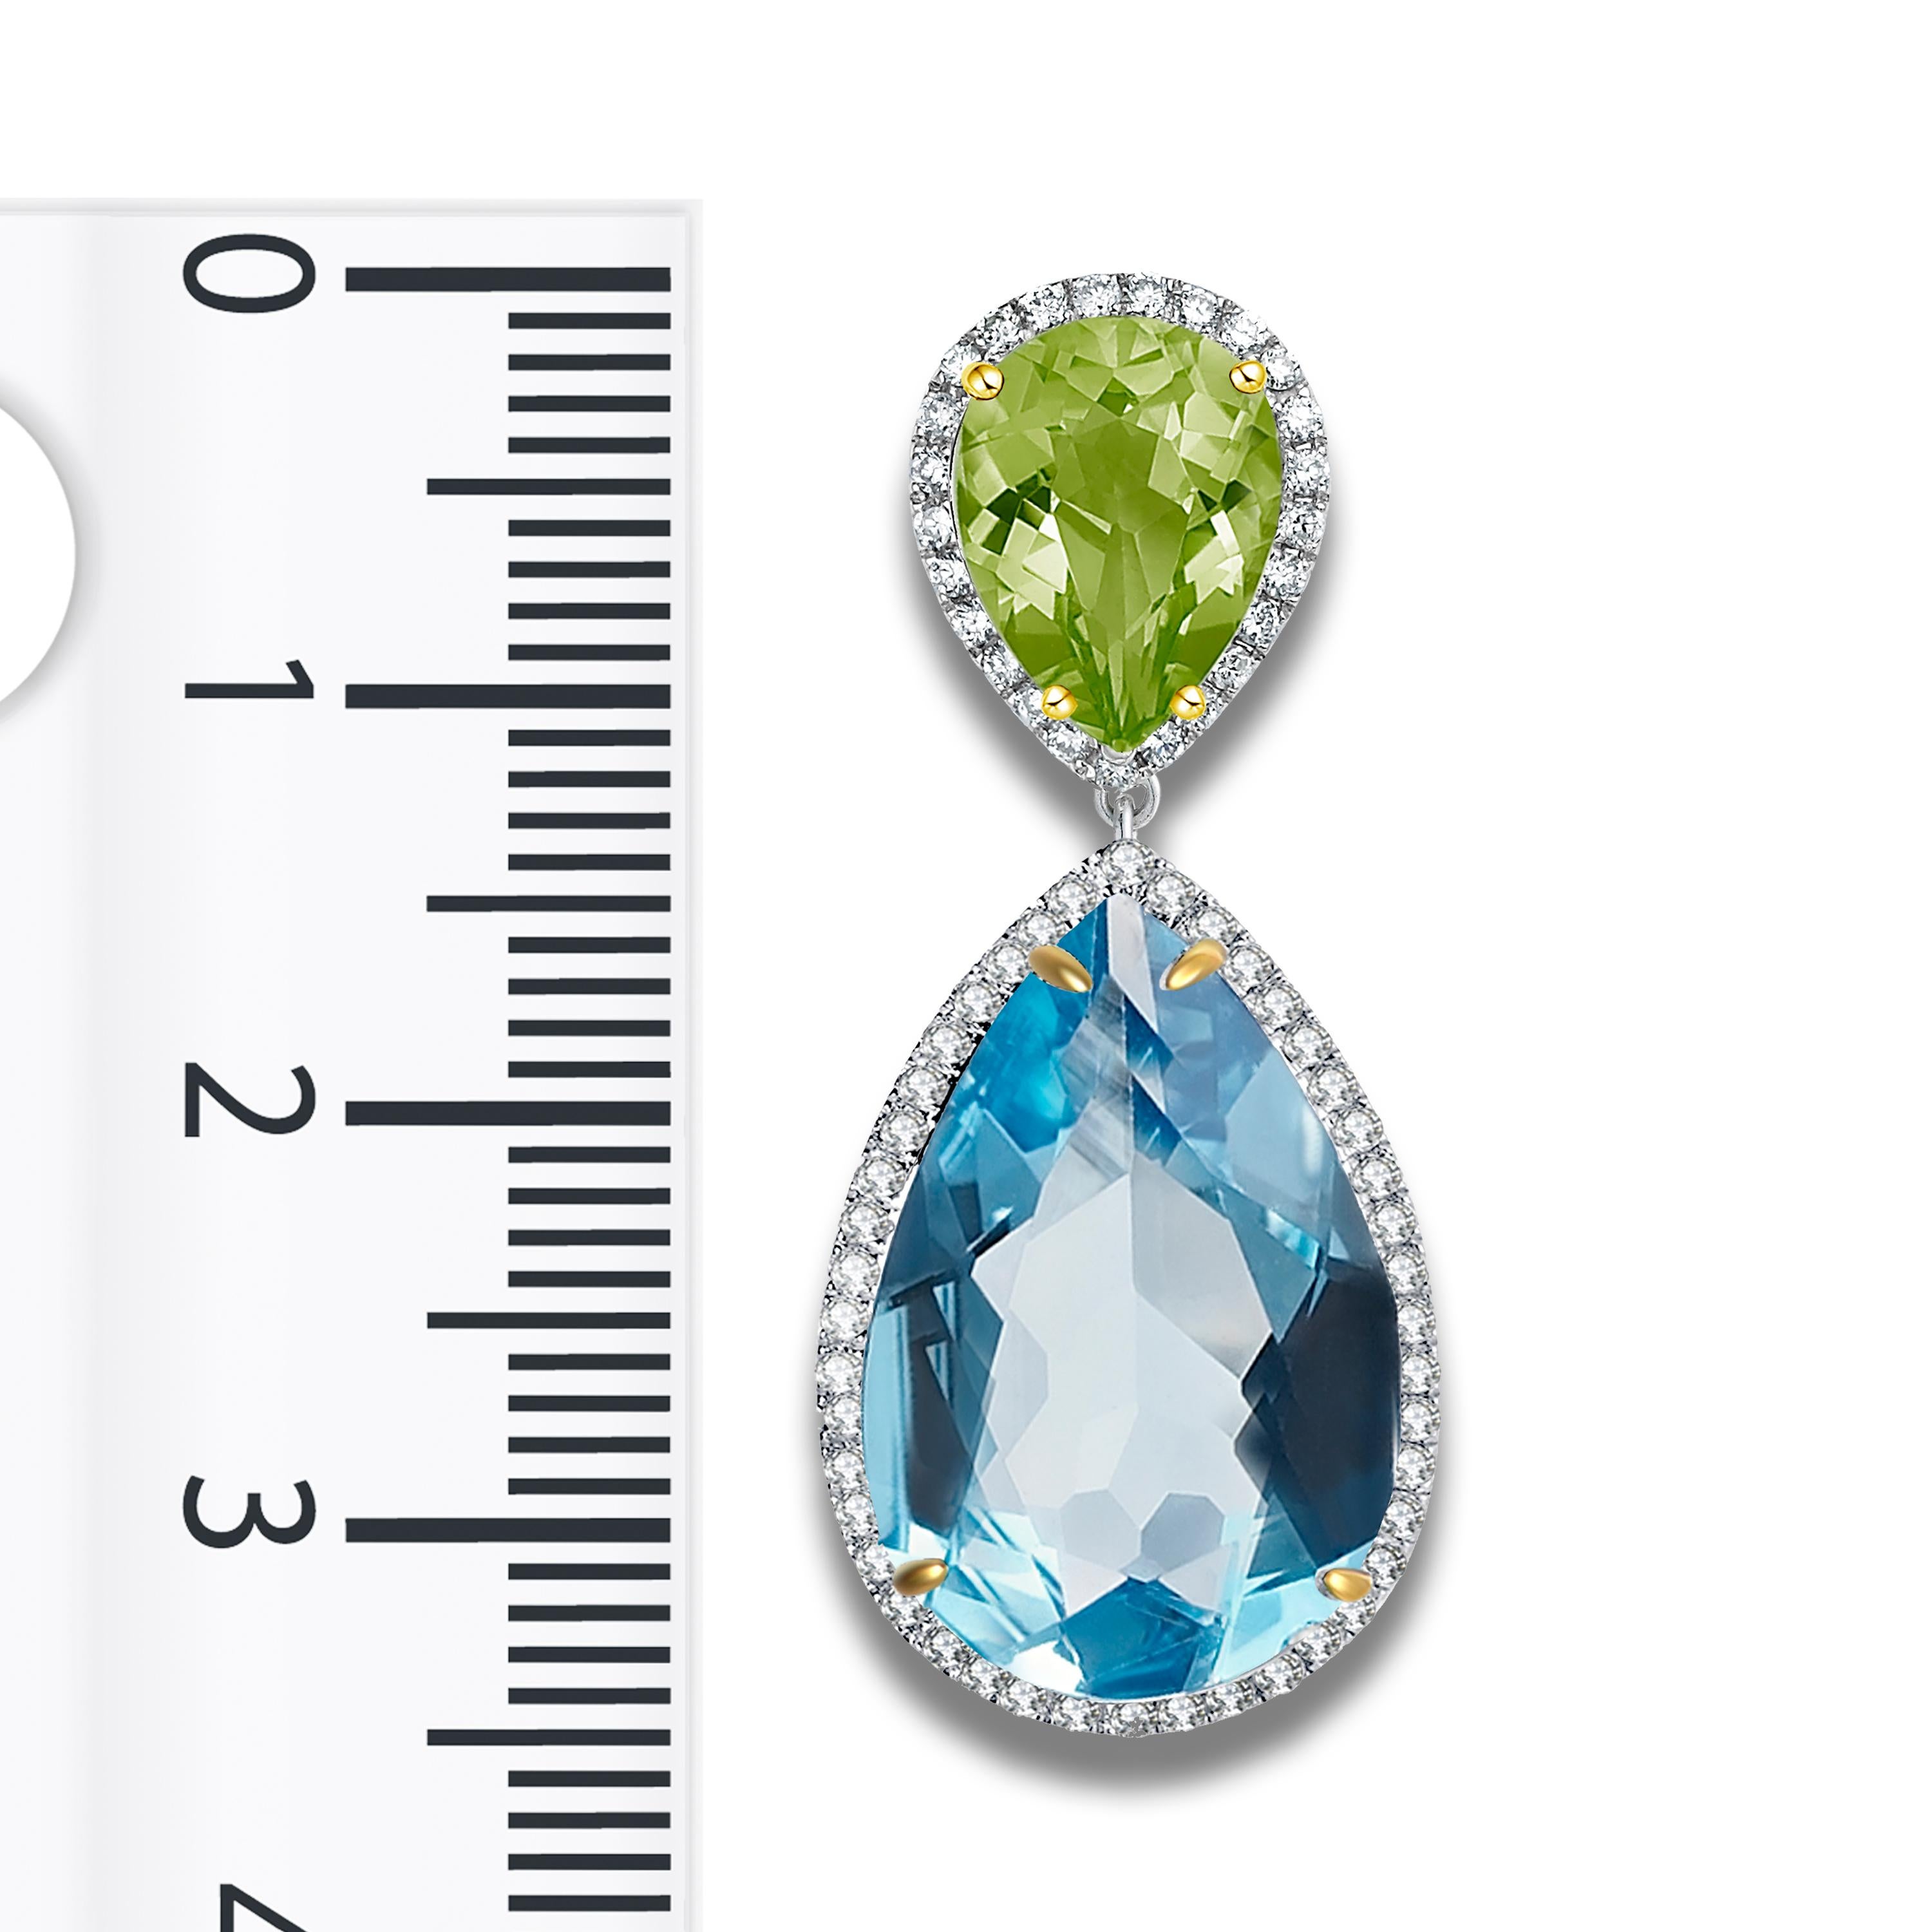 Description:
Add a touch of colour to your look with bright, breathtaking gemstones. These drop earrings feature 5.20ct peridots and 26.40ct blue topazes decorated with 1.06ct diamonds, set in 18ct white gold with yellow gold-plated